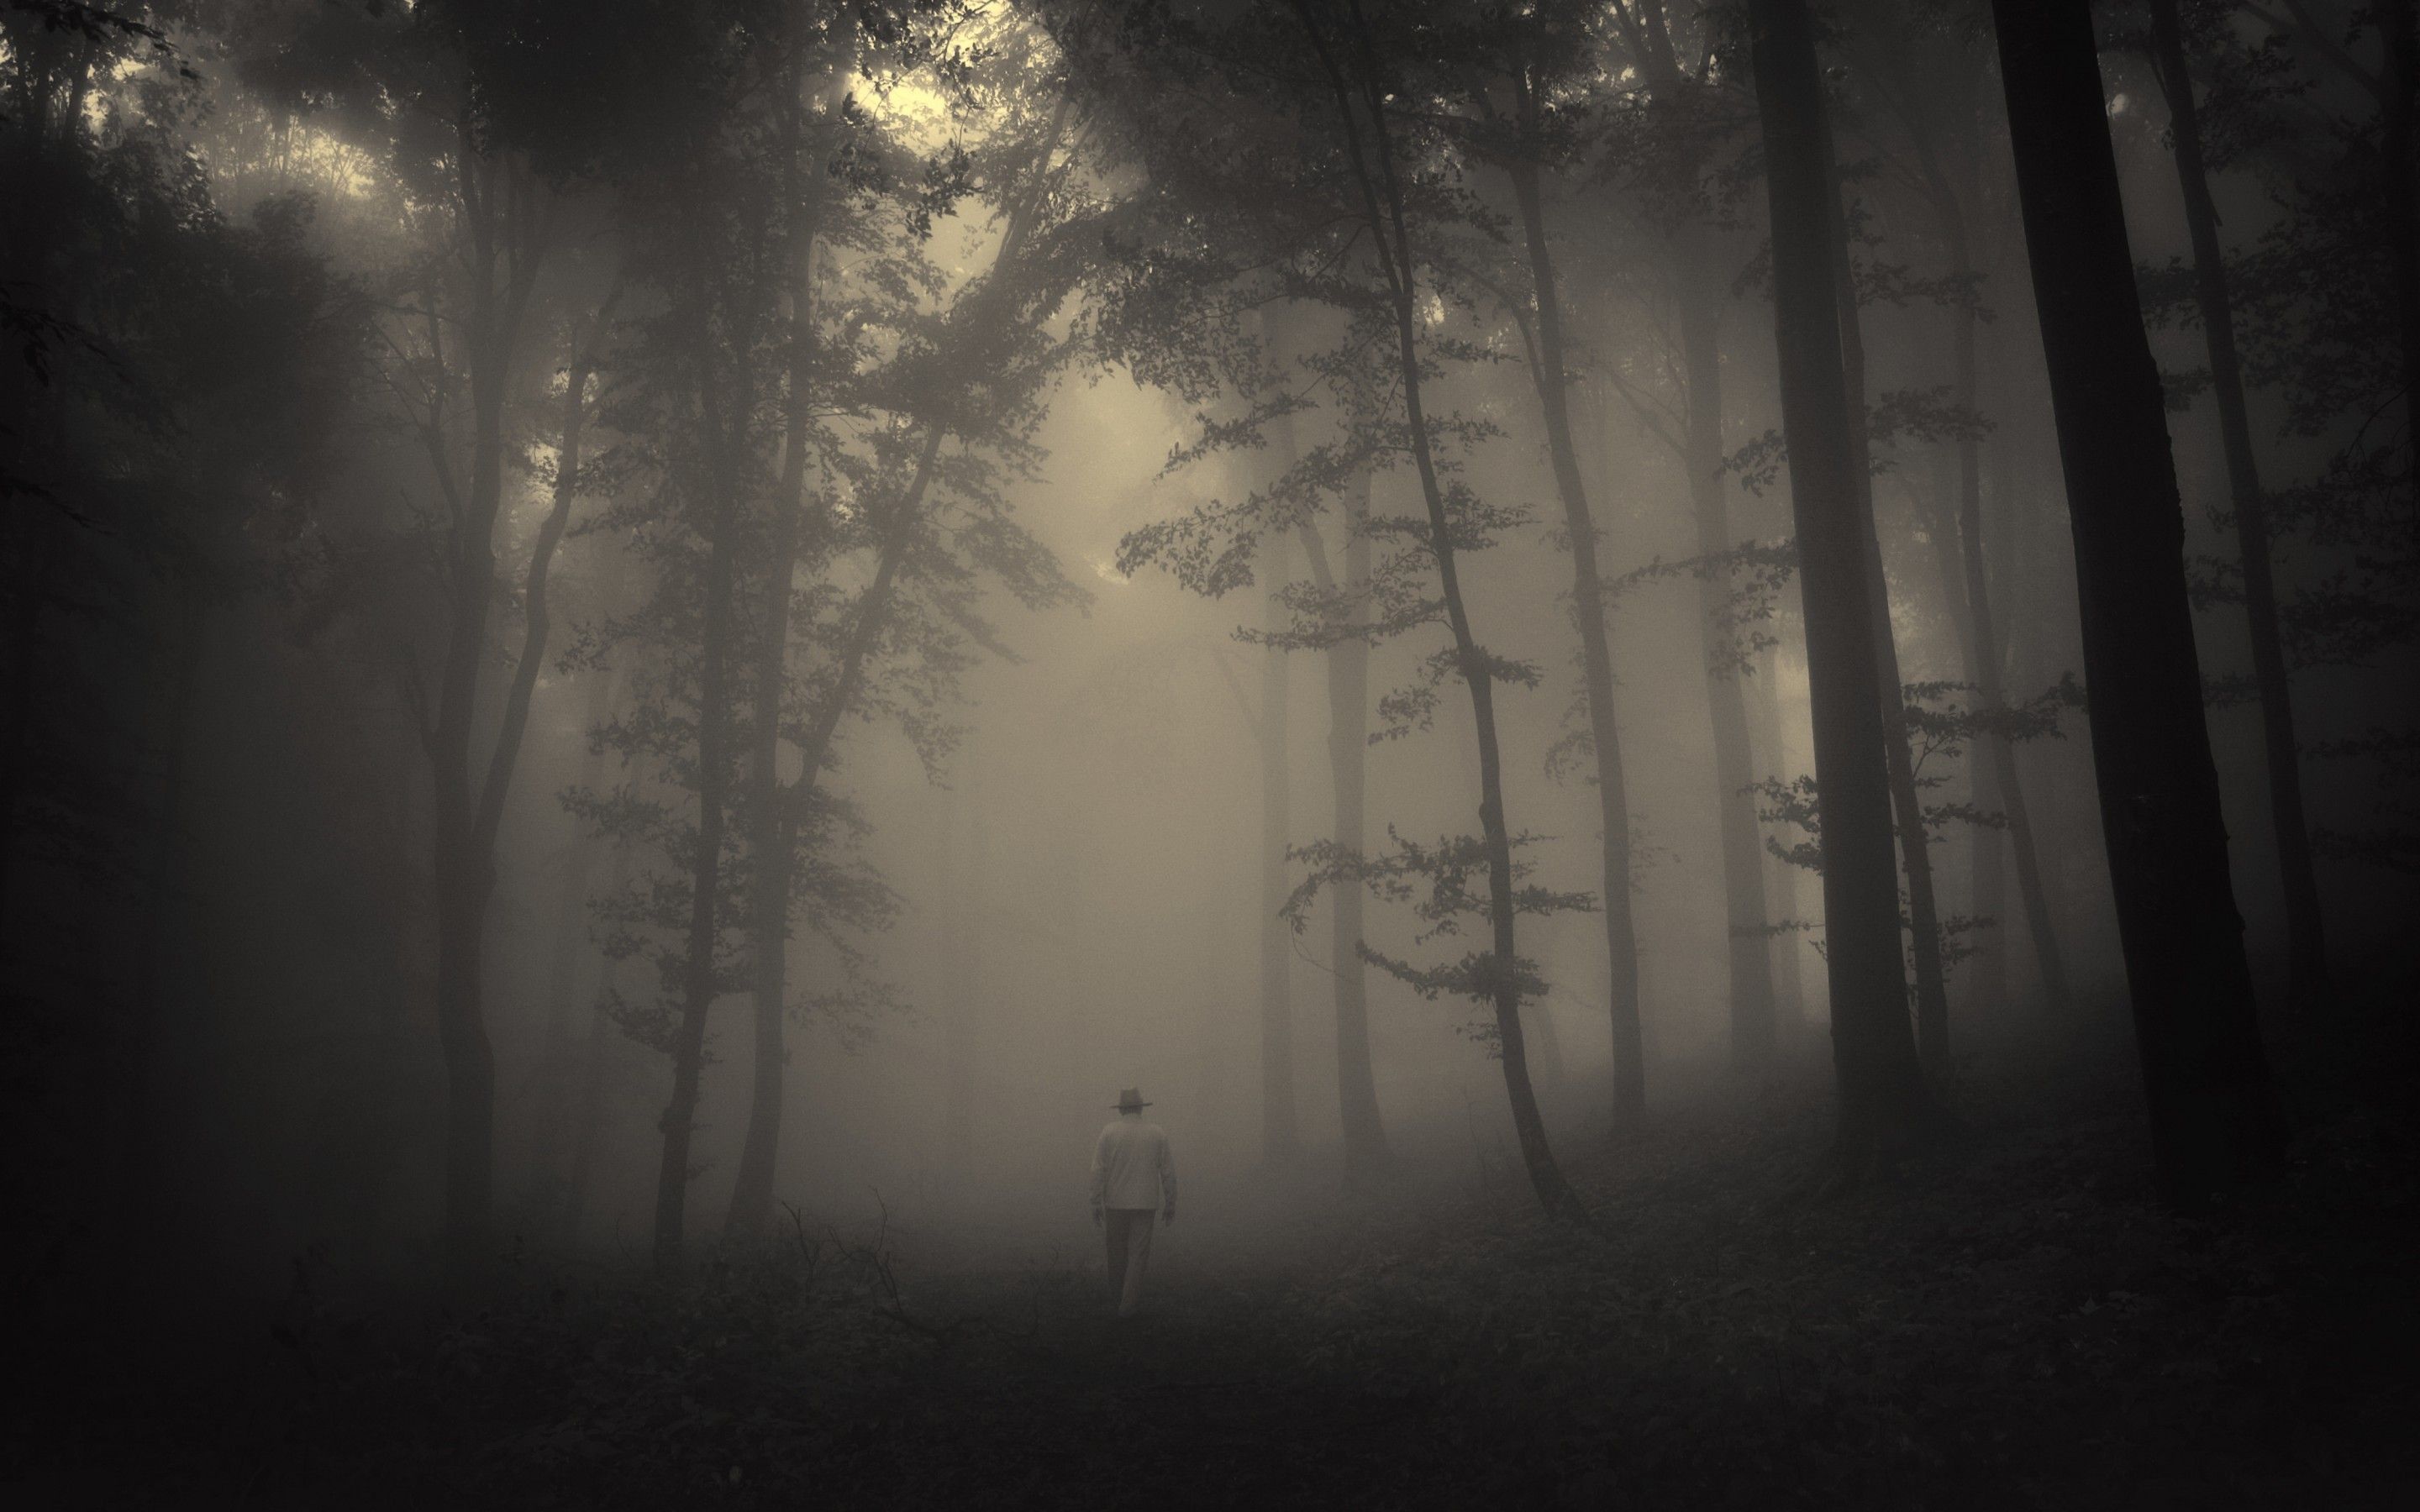 A person walking in the woods at night - Forest, creepy, foggy forest